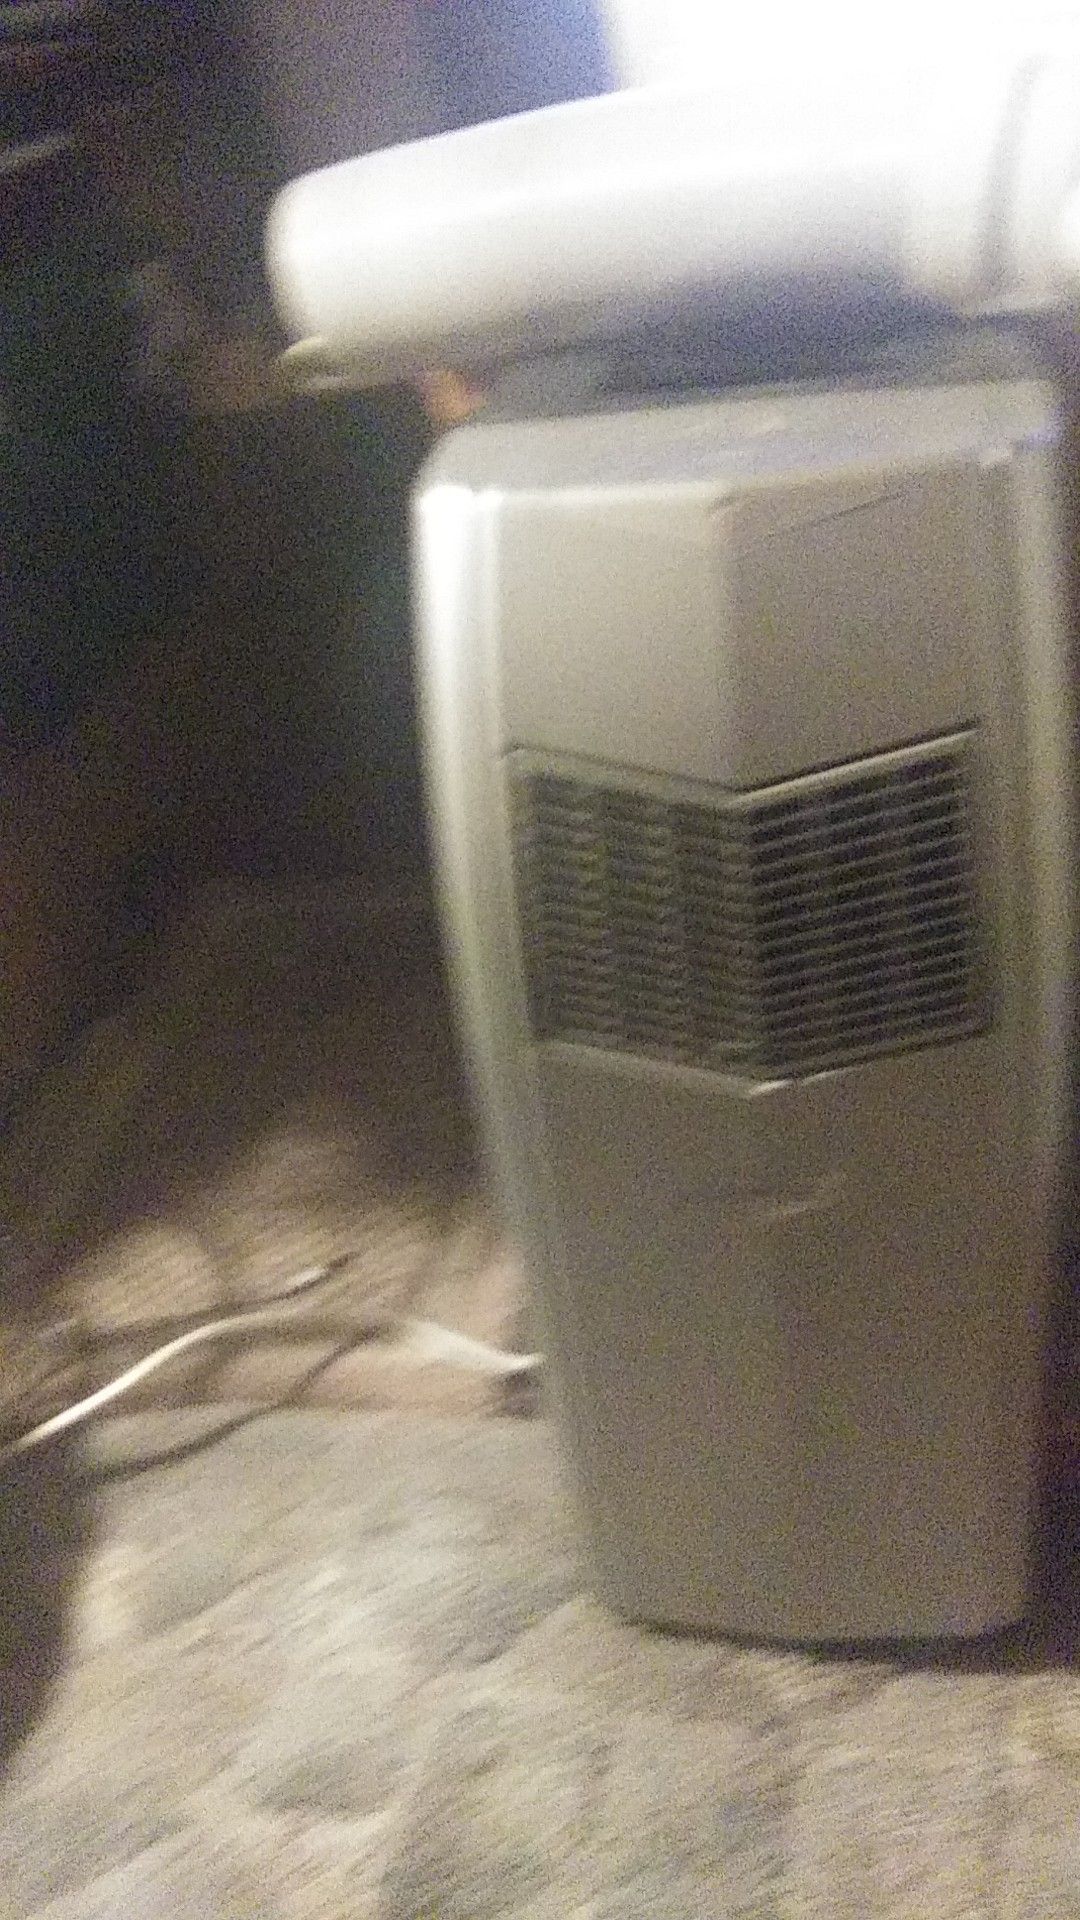 amcor stand up air conditioner works like new